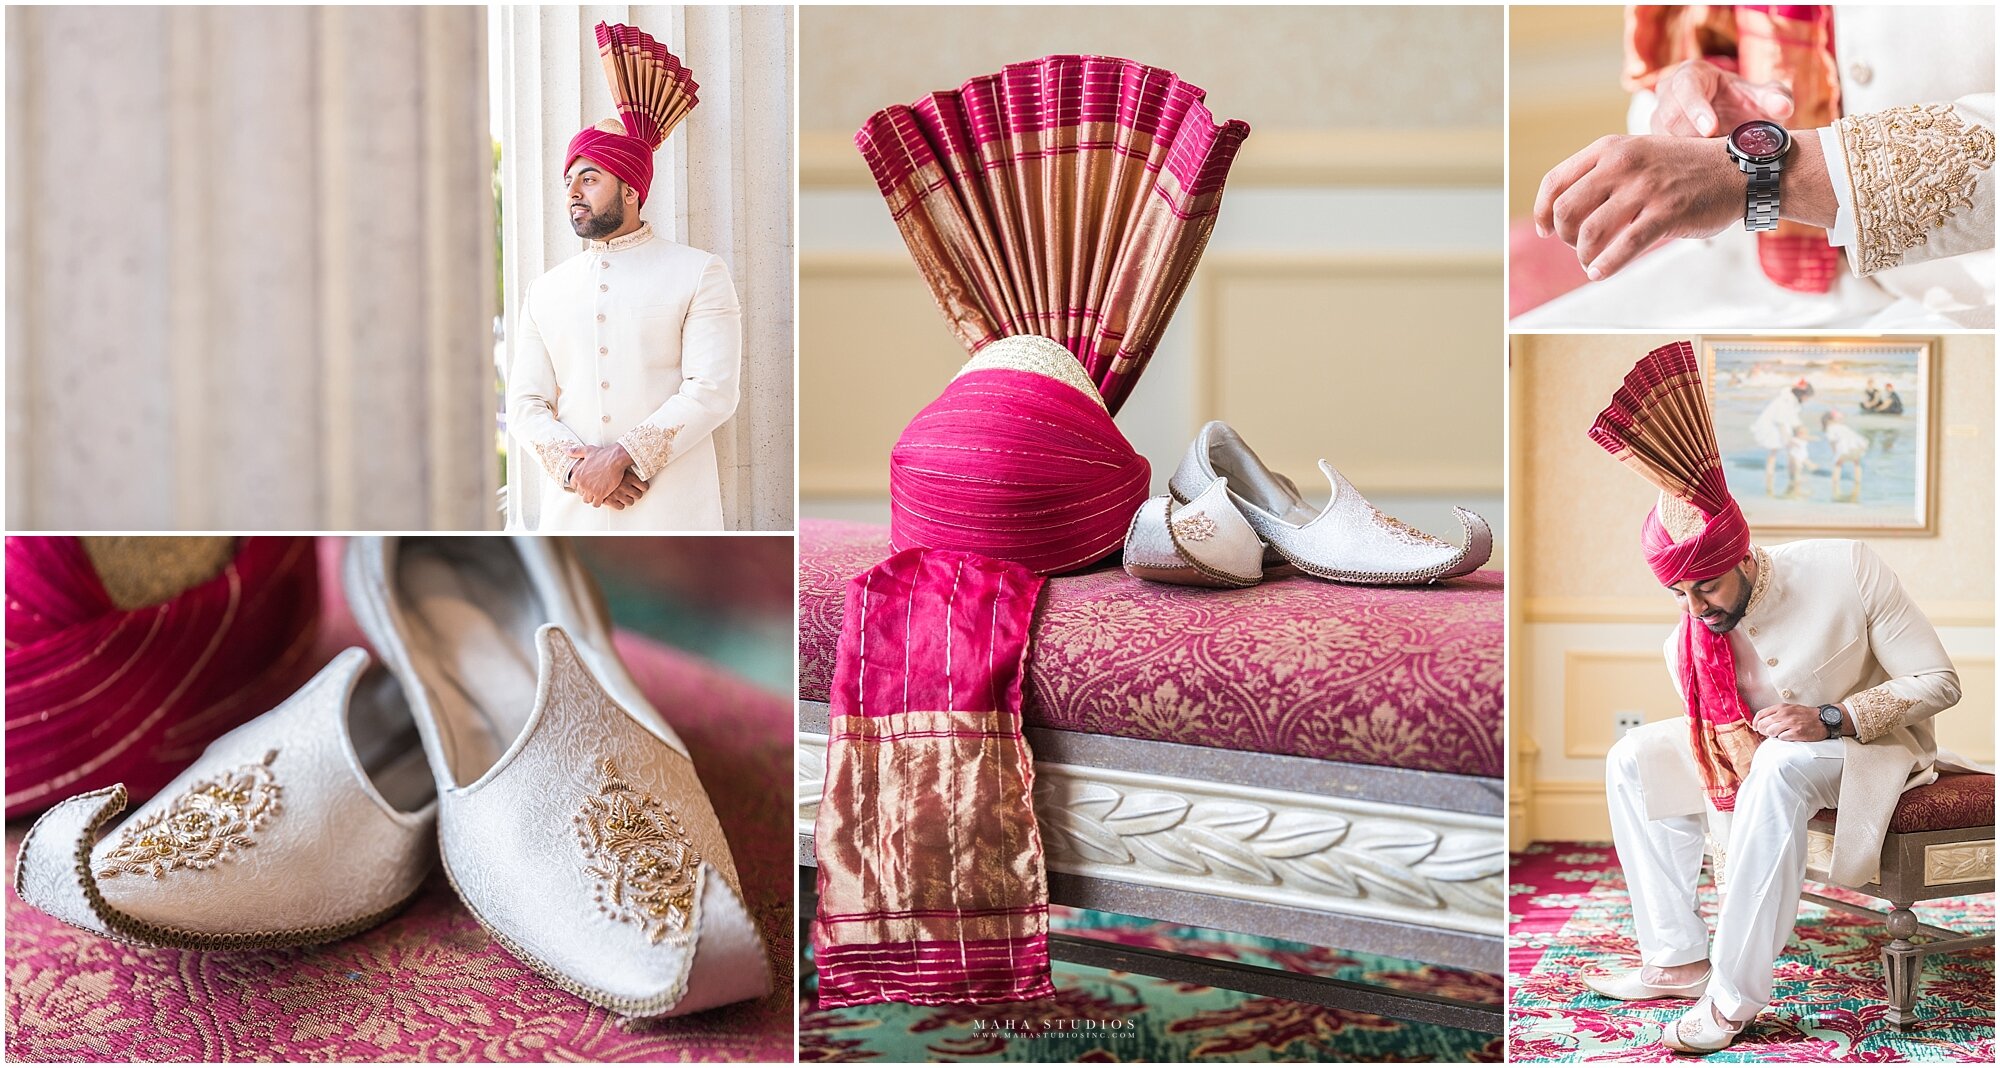 Haris was impeccably dressed. He paired his red turban with a crisp creme colored sherwani. I loved the contrast in colors for this groom’s outfit!